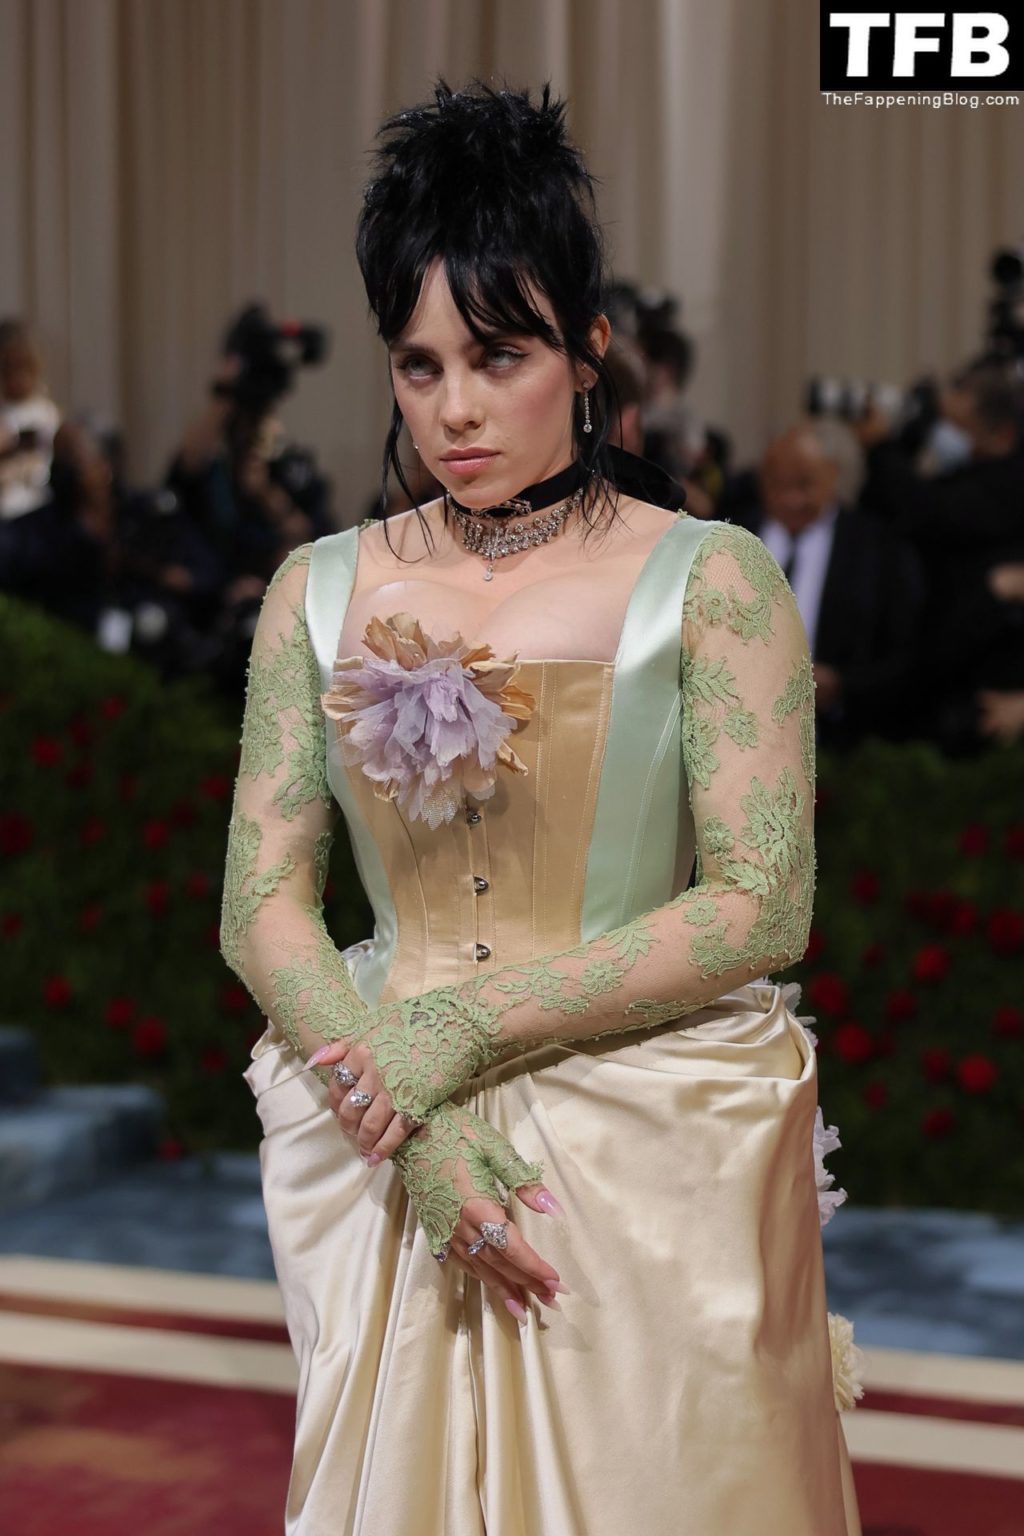 Billie Eilish Sexy The Fappening Blog 47 1024x1536 - Billie Eilish Showcases Nice Cleavage at The 2022 Met Gala in NYC (155 Photos)